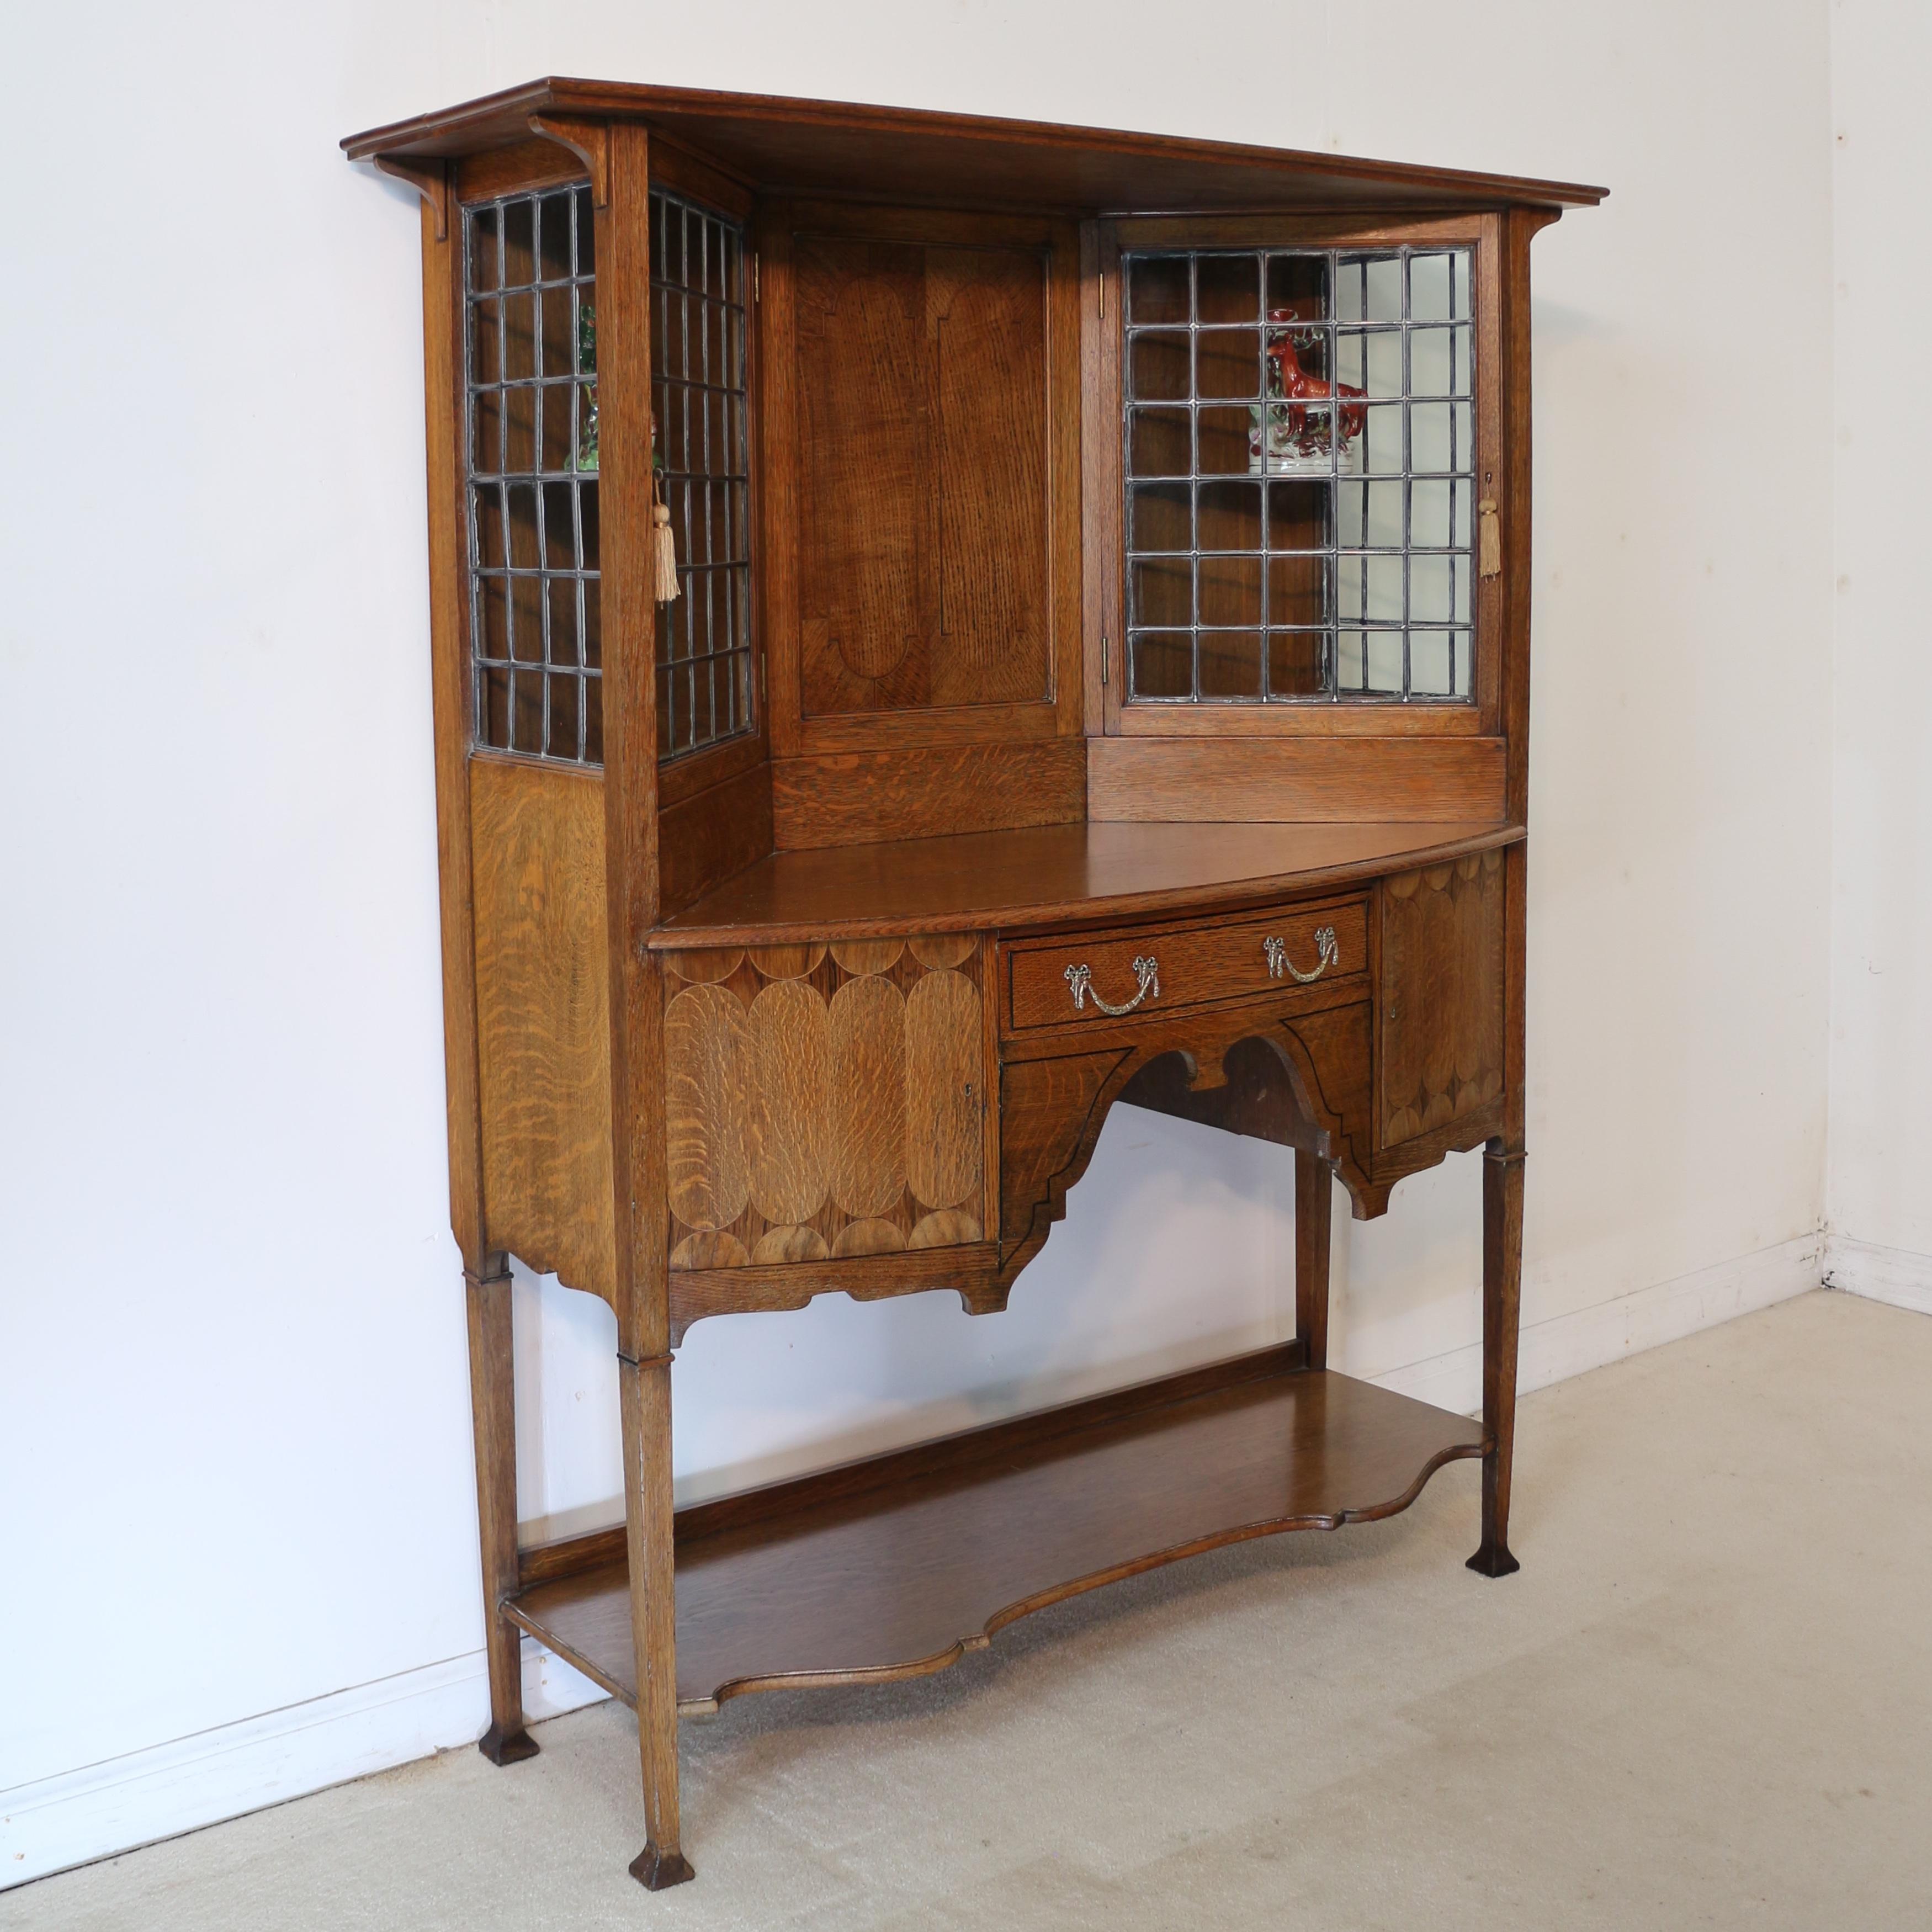 An unusual Arts & Crafts quarter-sawn oak & marquetry bowfront sideboard cabinet by Bath Cabinet Makers. Dating to circa 1895 this beautiful side cabinet is of neat proportions and features a flared rectangular cornice above an inlaid panelled back